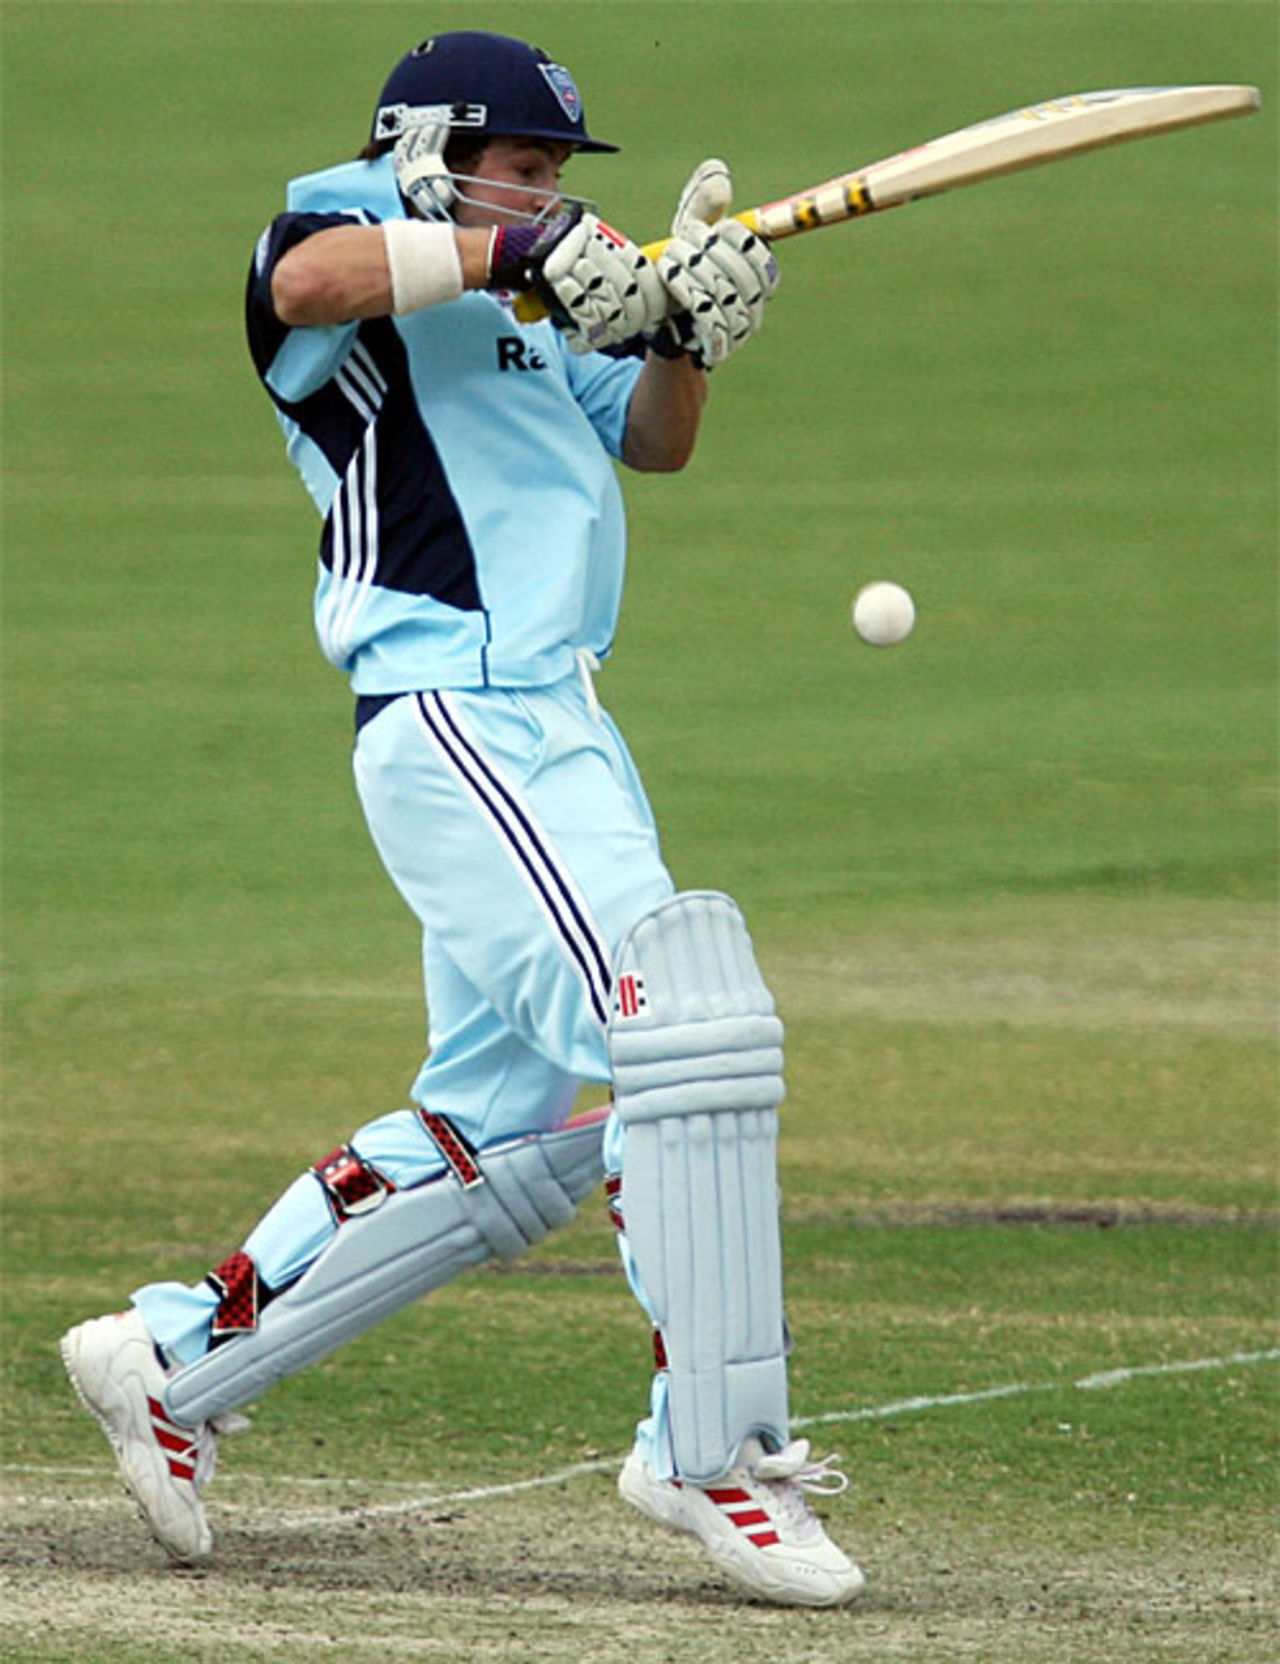 Ed Cowan had a few let-offs on his way to 37, South Australia v New South Wales, Adelaide, November 7, 2007